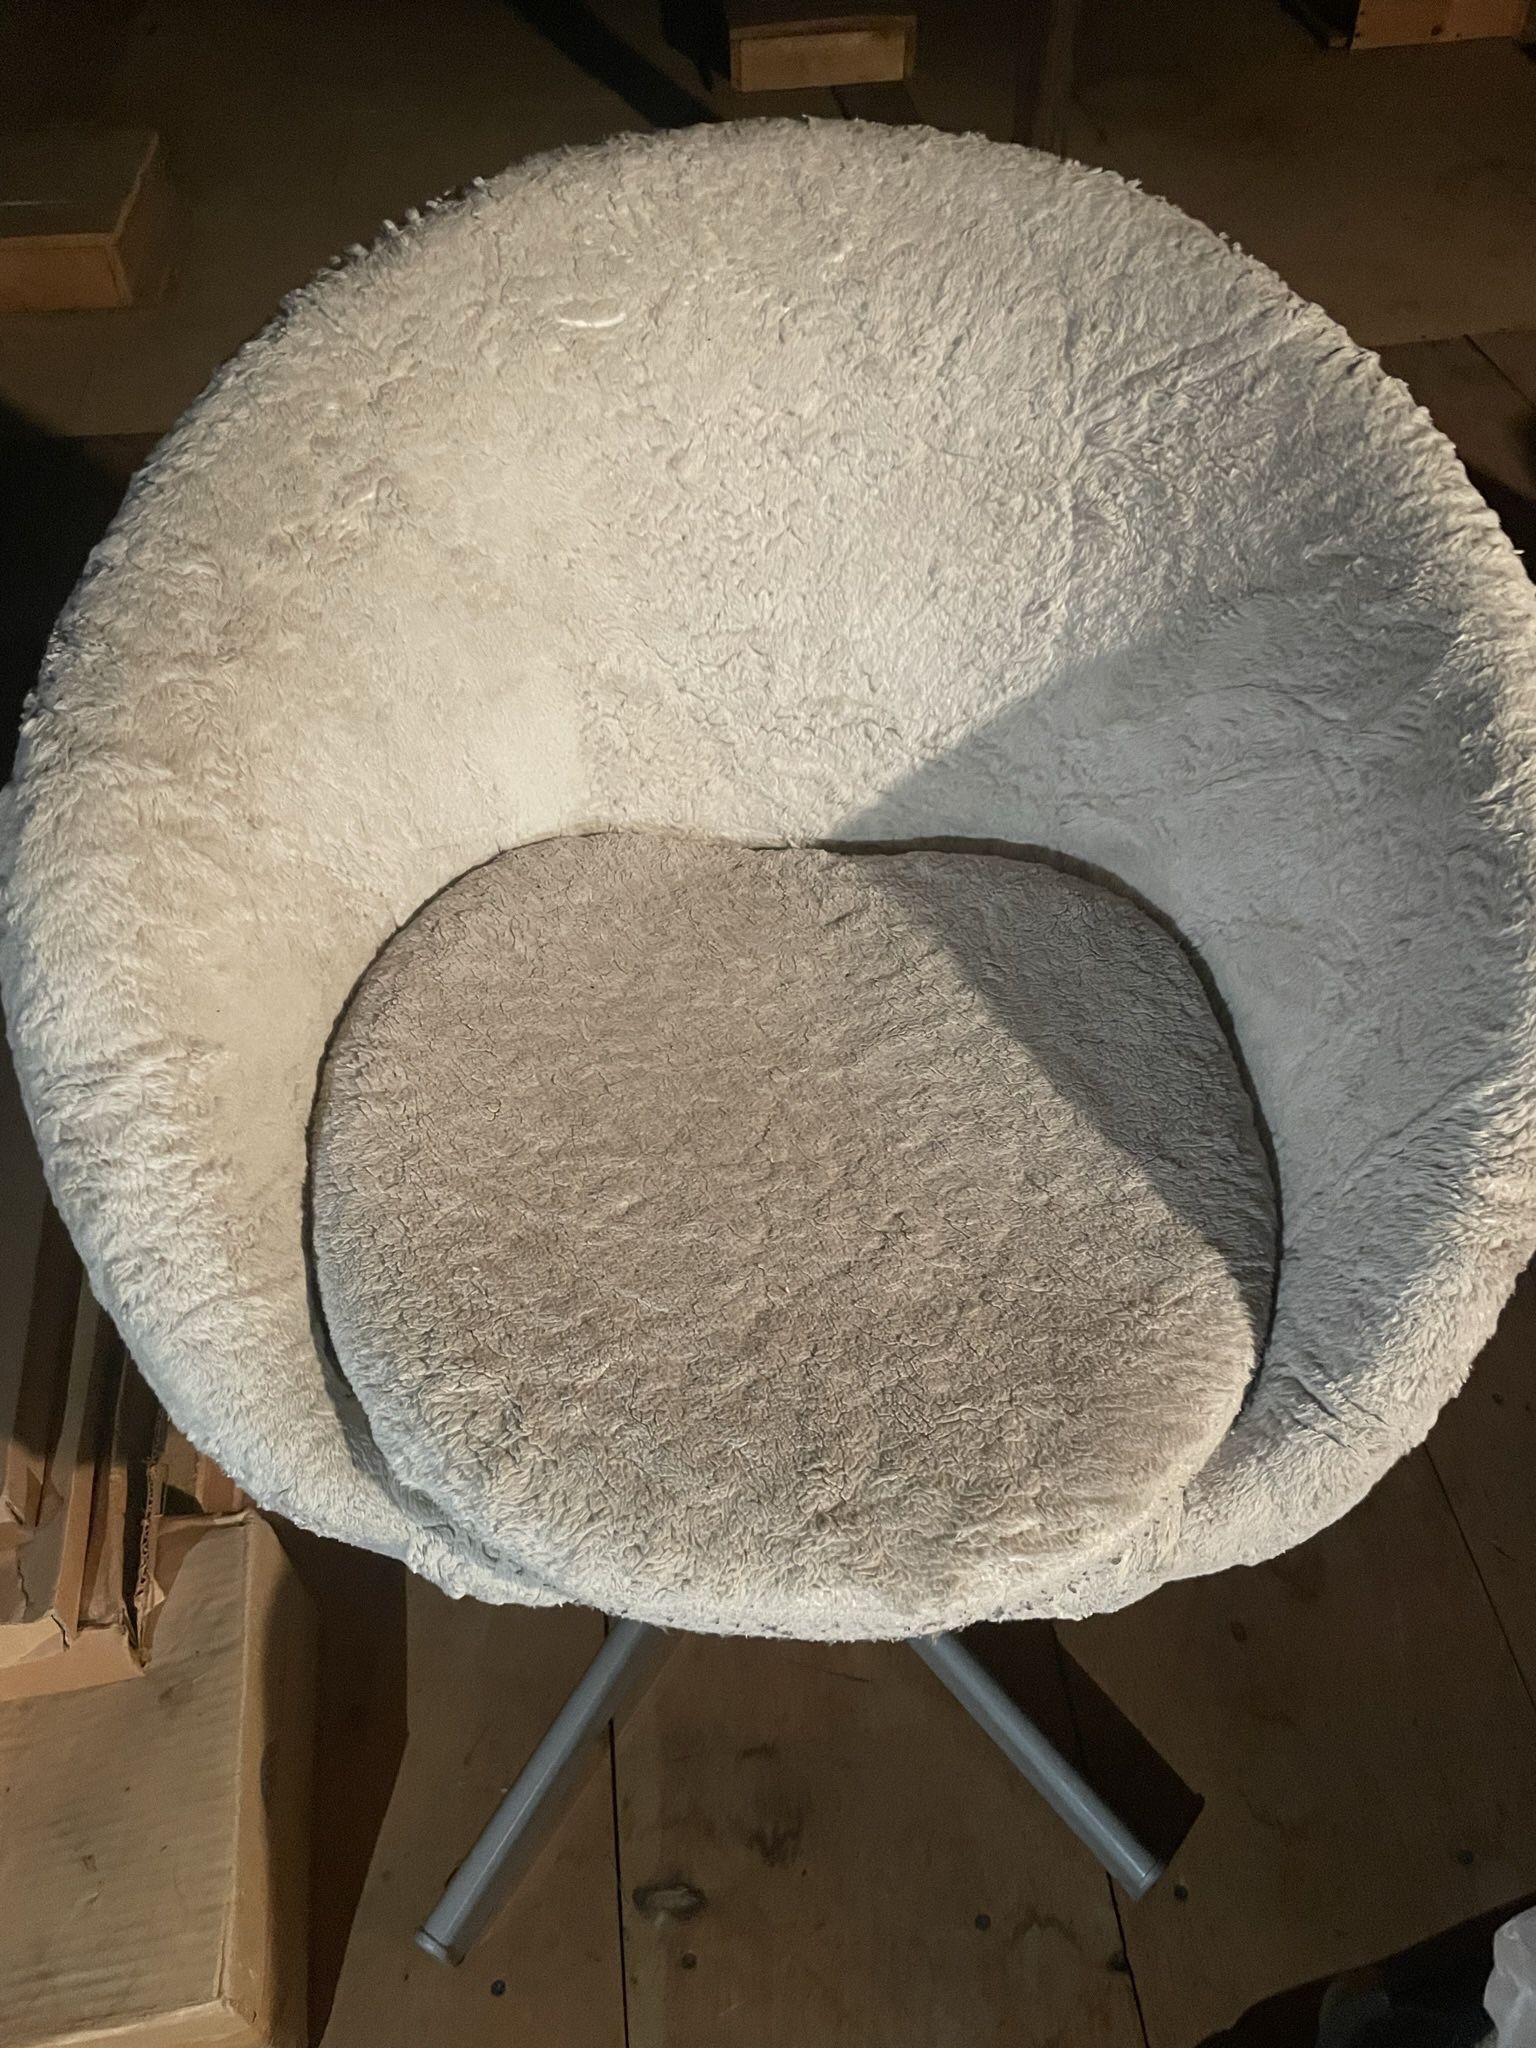 Comfortable Swirling Chair With A White Fuzzy Cover